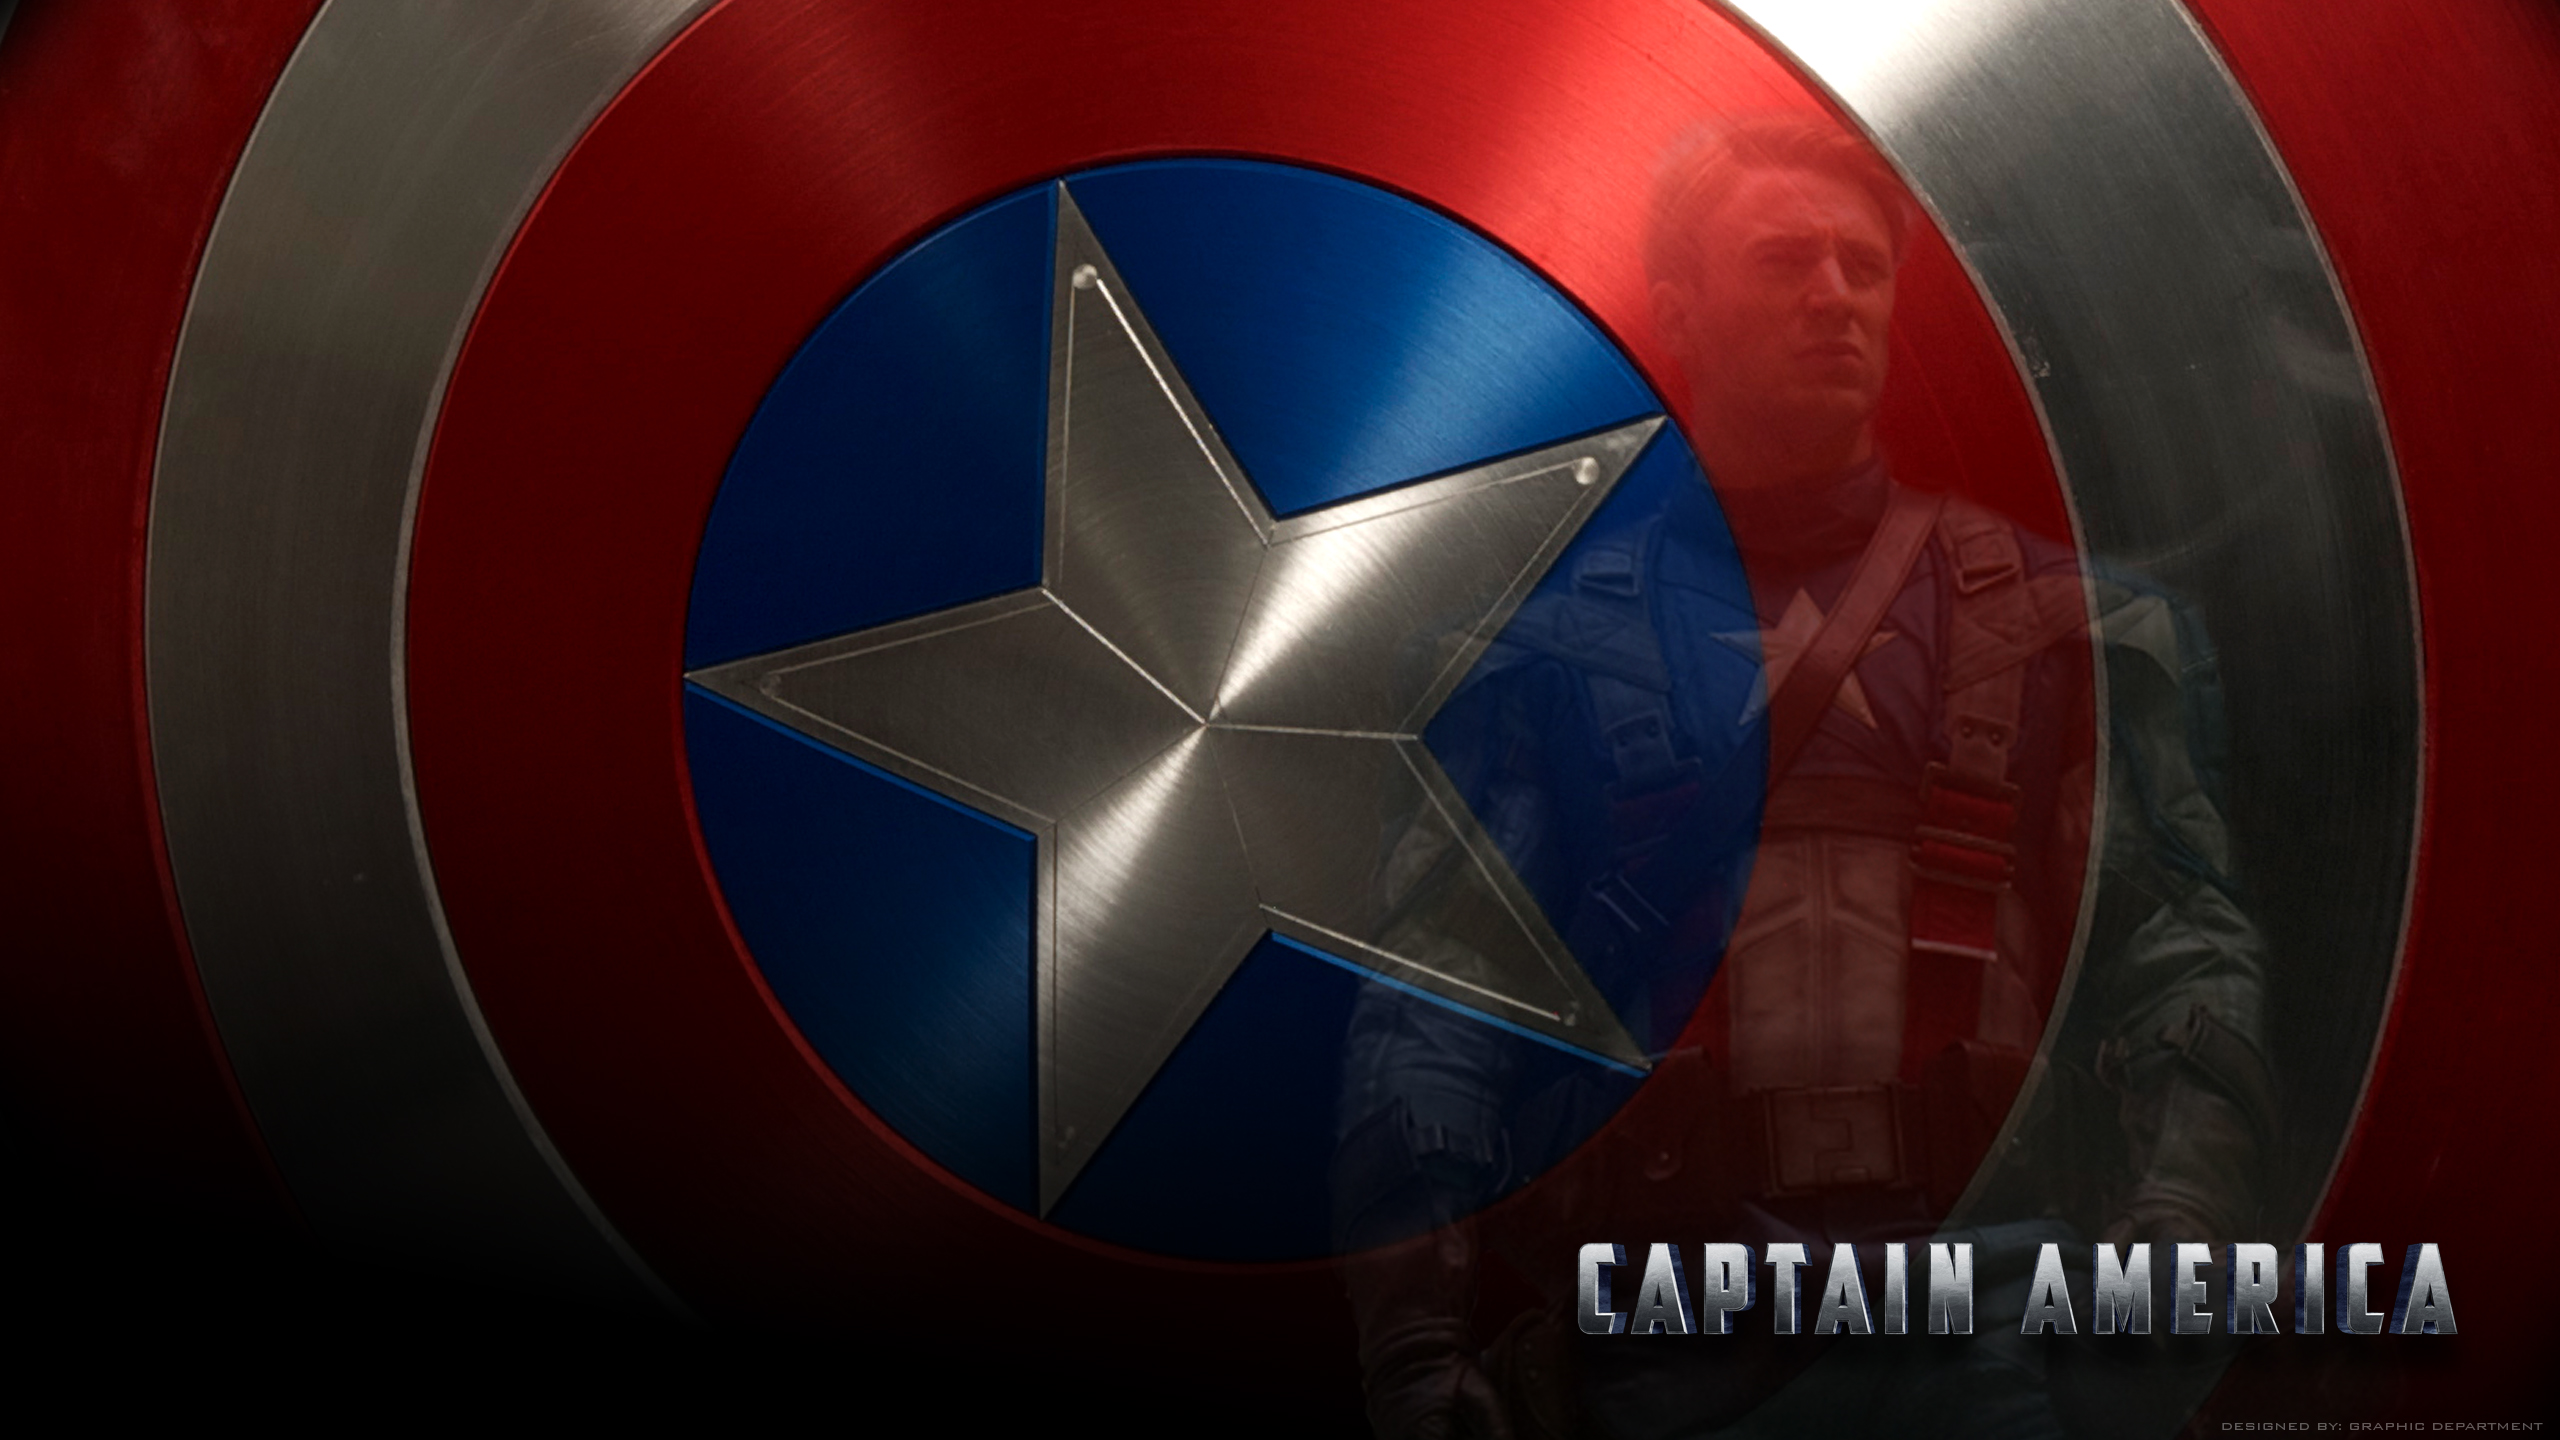 Captain America Wallpapers Awesome Wallpapers 2560x1440